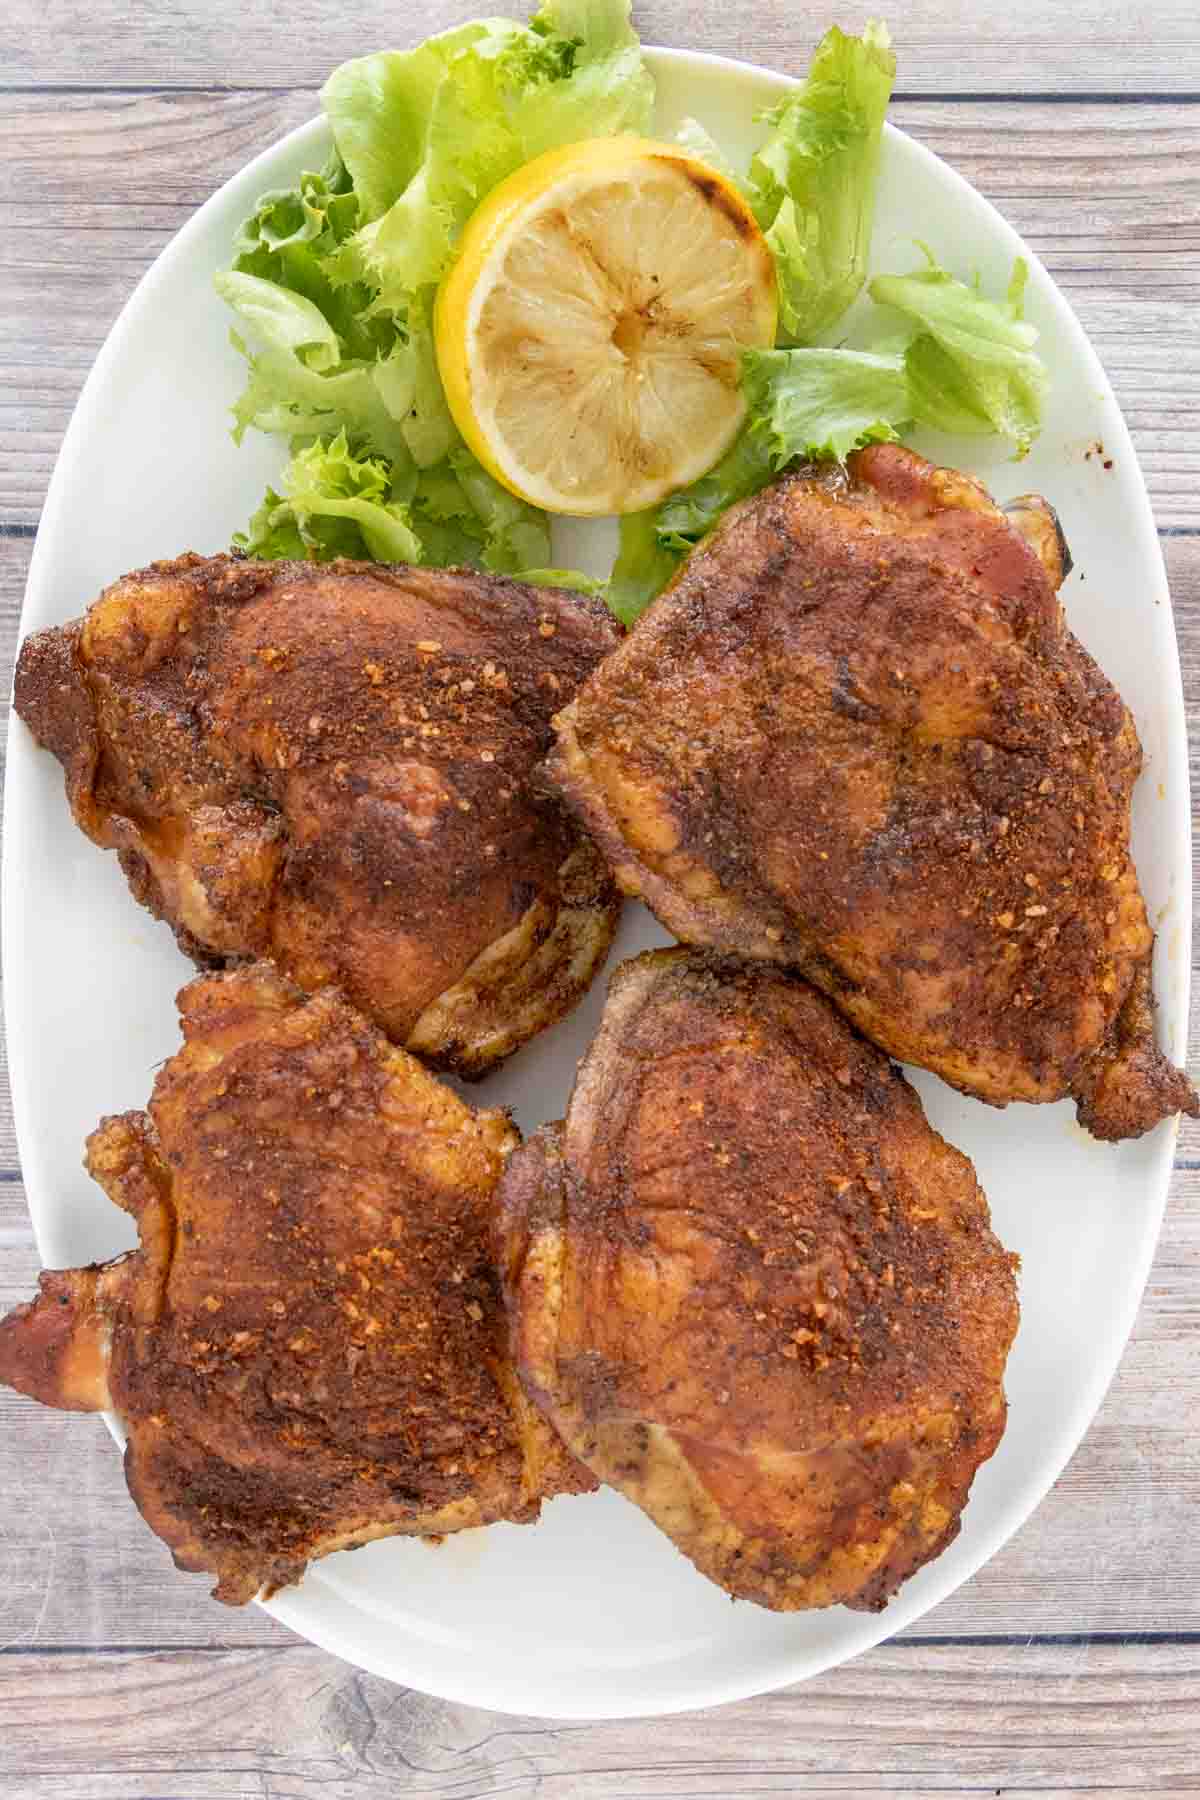 Smoked Chicken Thighs on a white platter with lettuce and smoked lemon half.